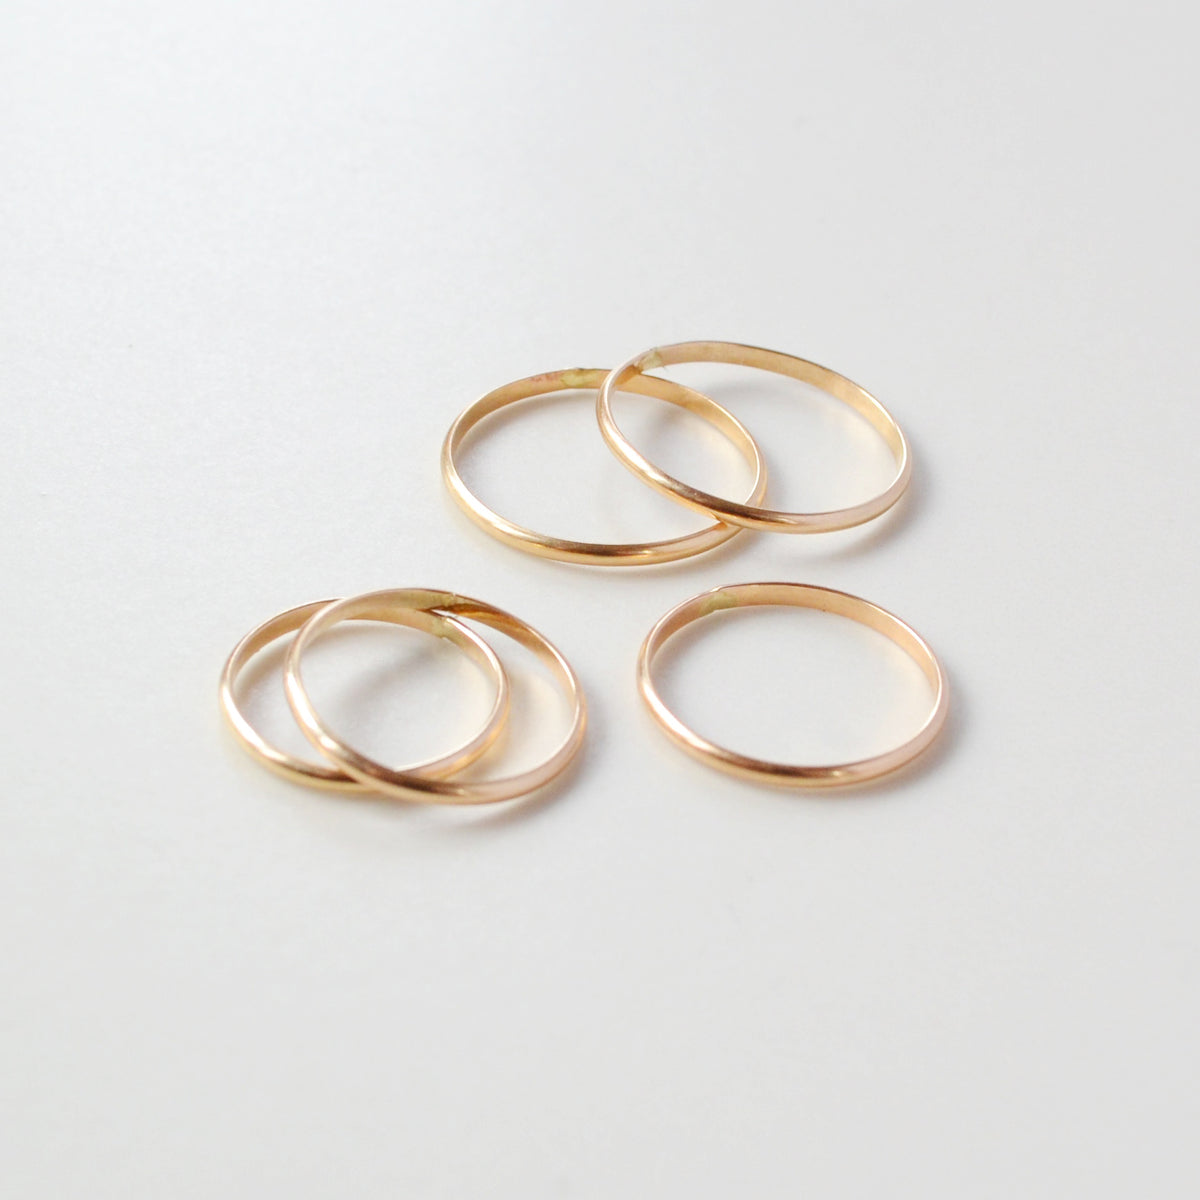 Gift set with five gold rings